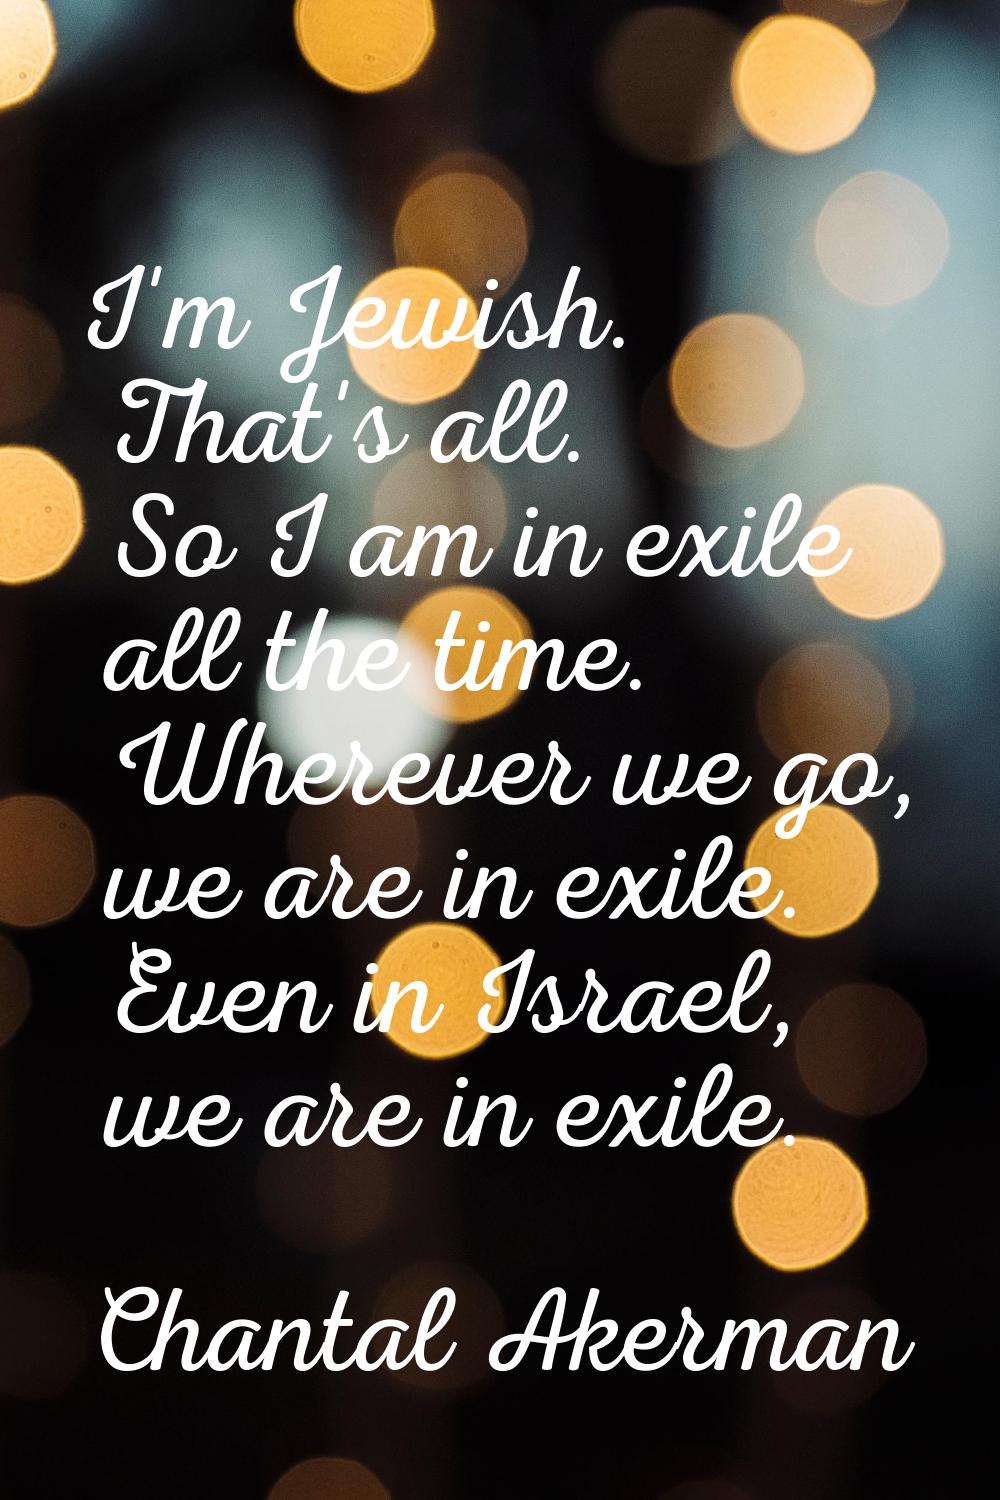 I'm Jewish. That's all. So I am in exile all the time. Wherever we go, we are in exile. Even in Isr